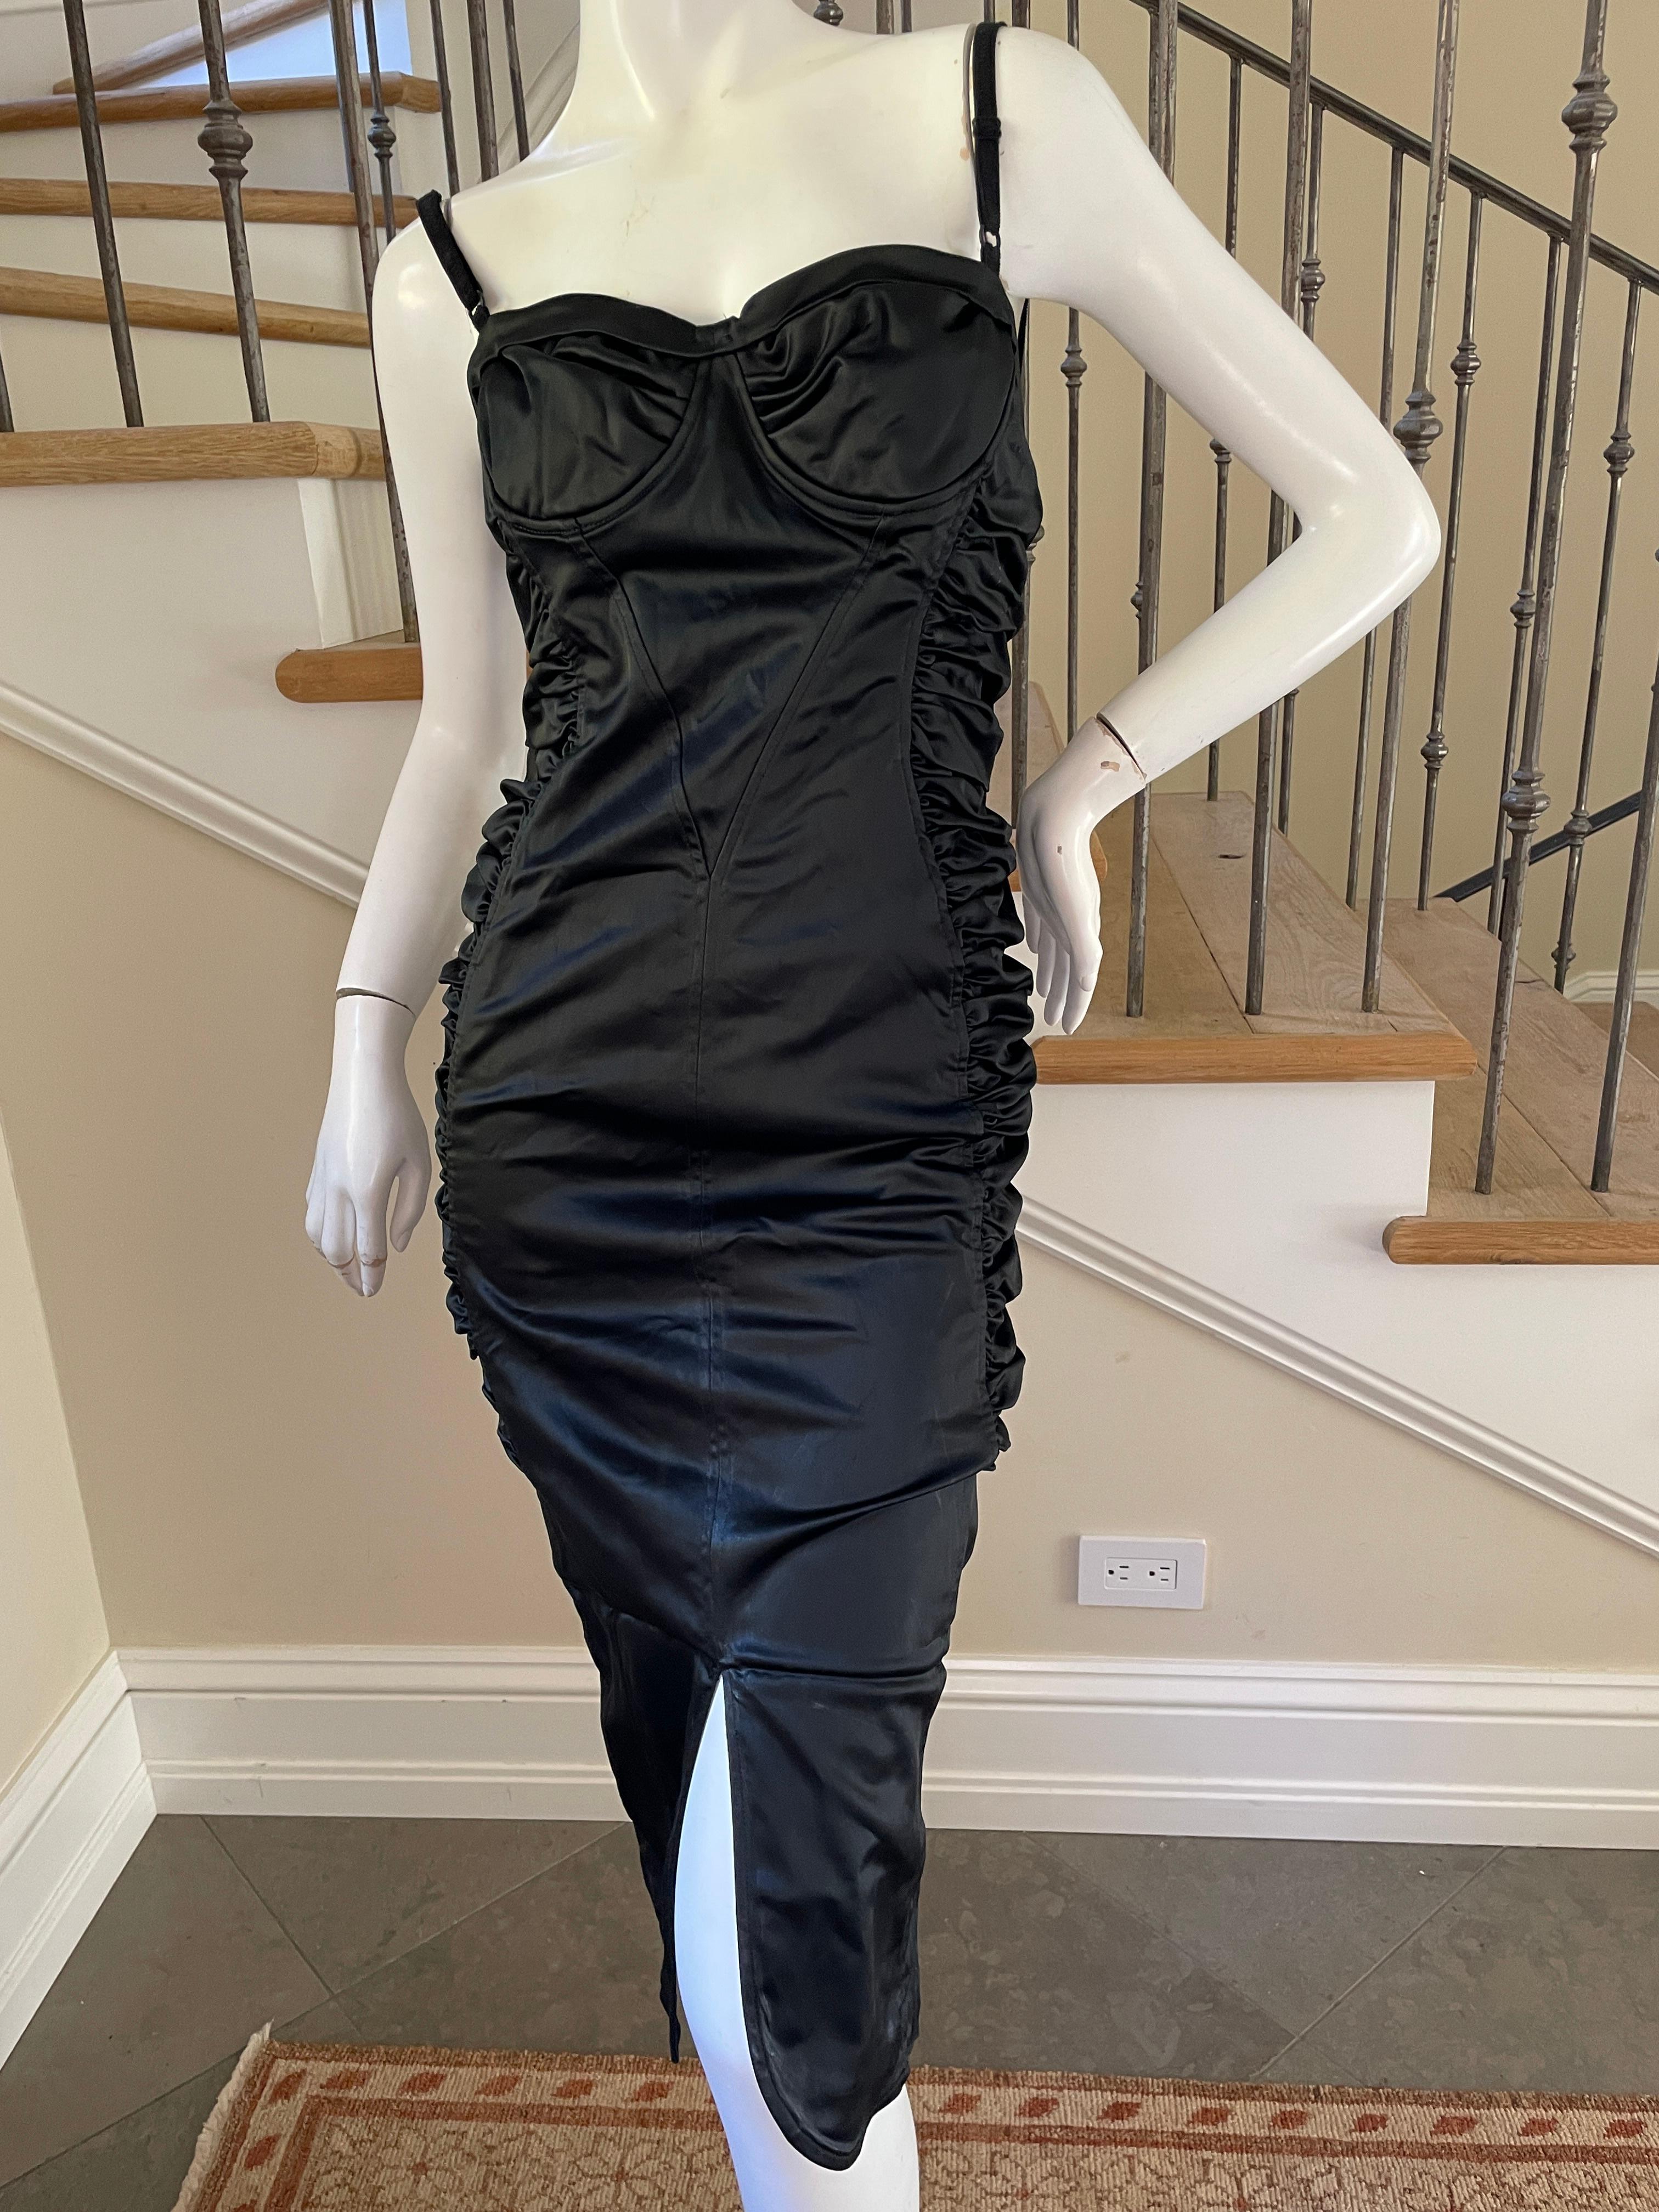 D&G by Dolce & Gabbana Vintage Black Ruched Cocktail Dress with Underwire Bra For Sale 5